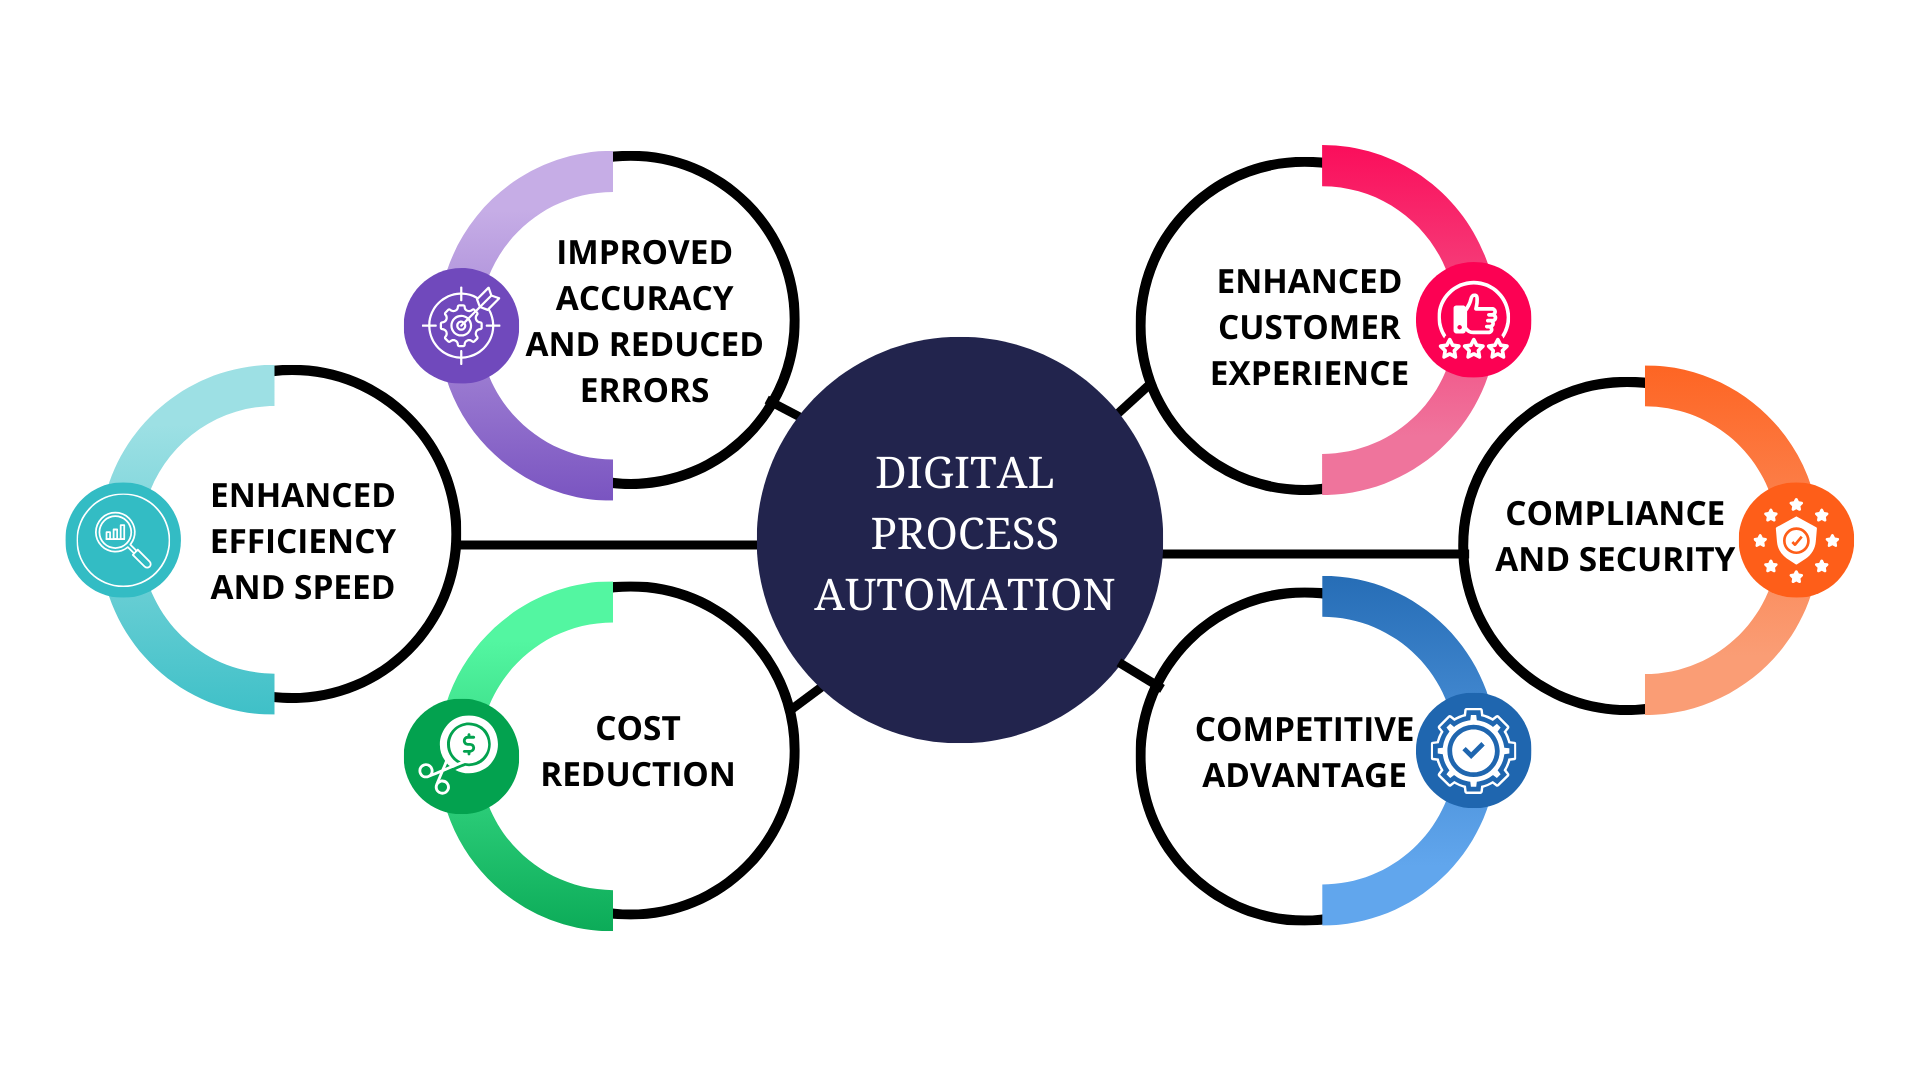 Digital process automation benefits: Enhanced Efficiency and Speed, Improved Accuracy and Reduced Errors, Cost Reduction, Enhanced Customer Experience, Compliance and Security, Competitive Advantage